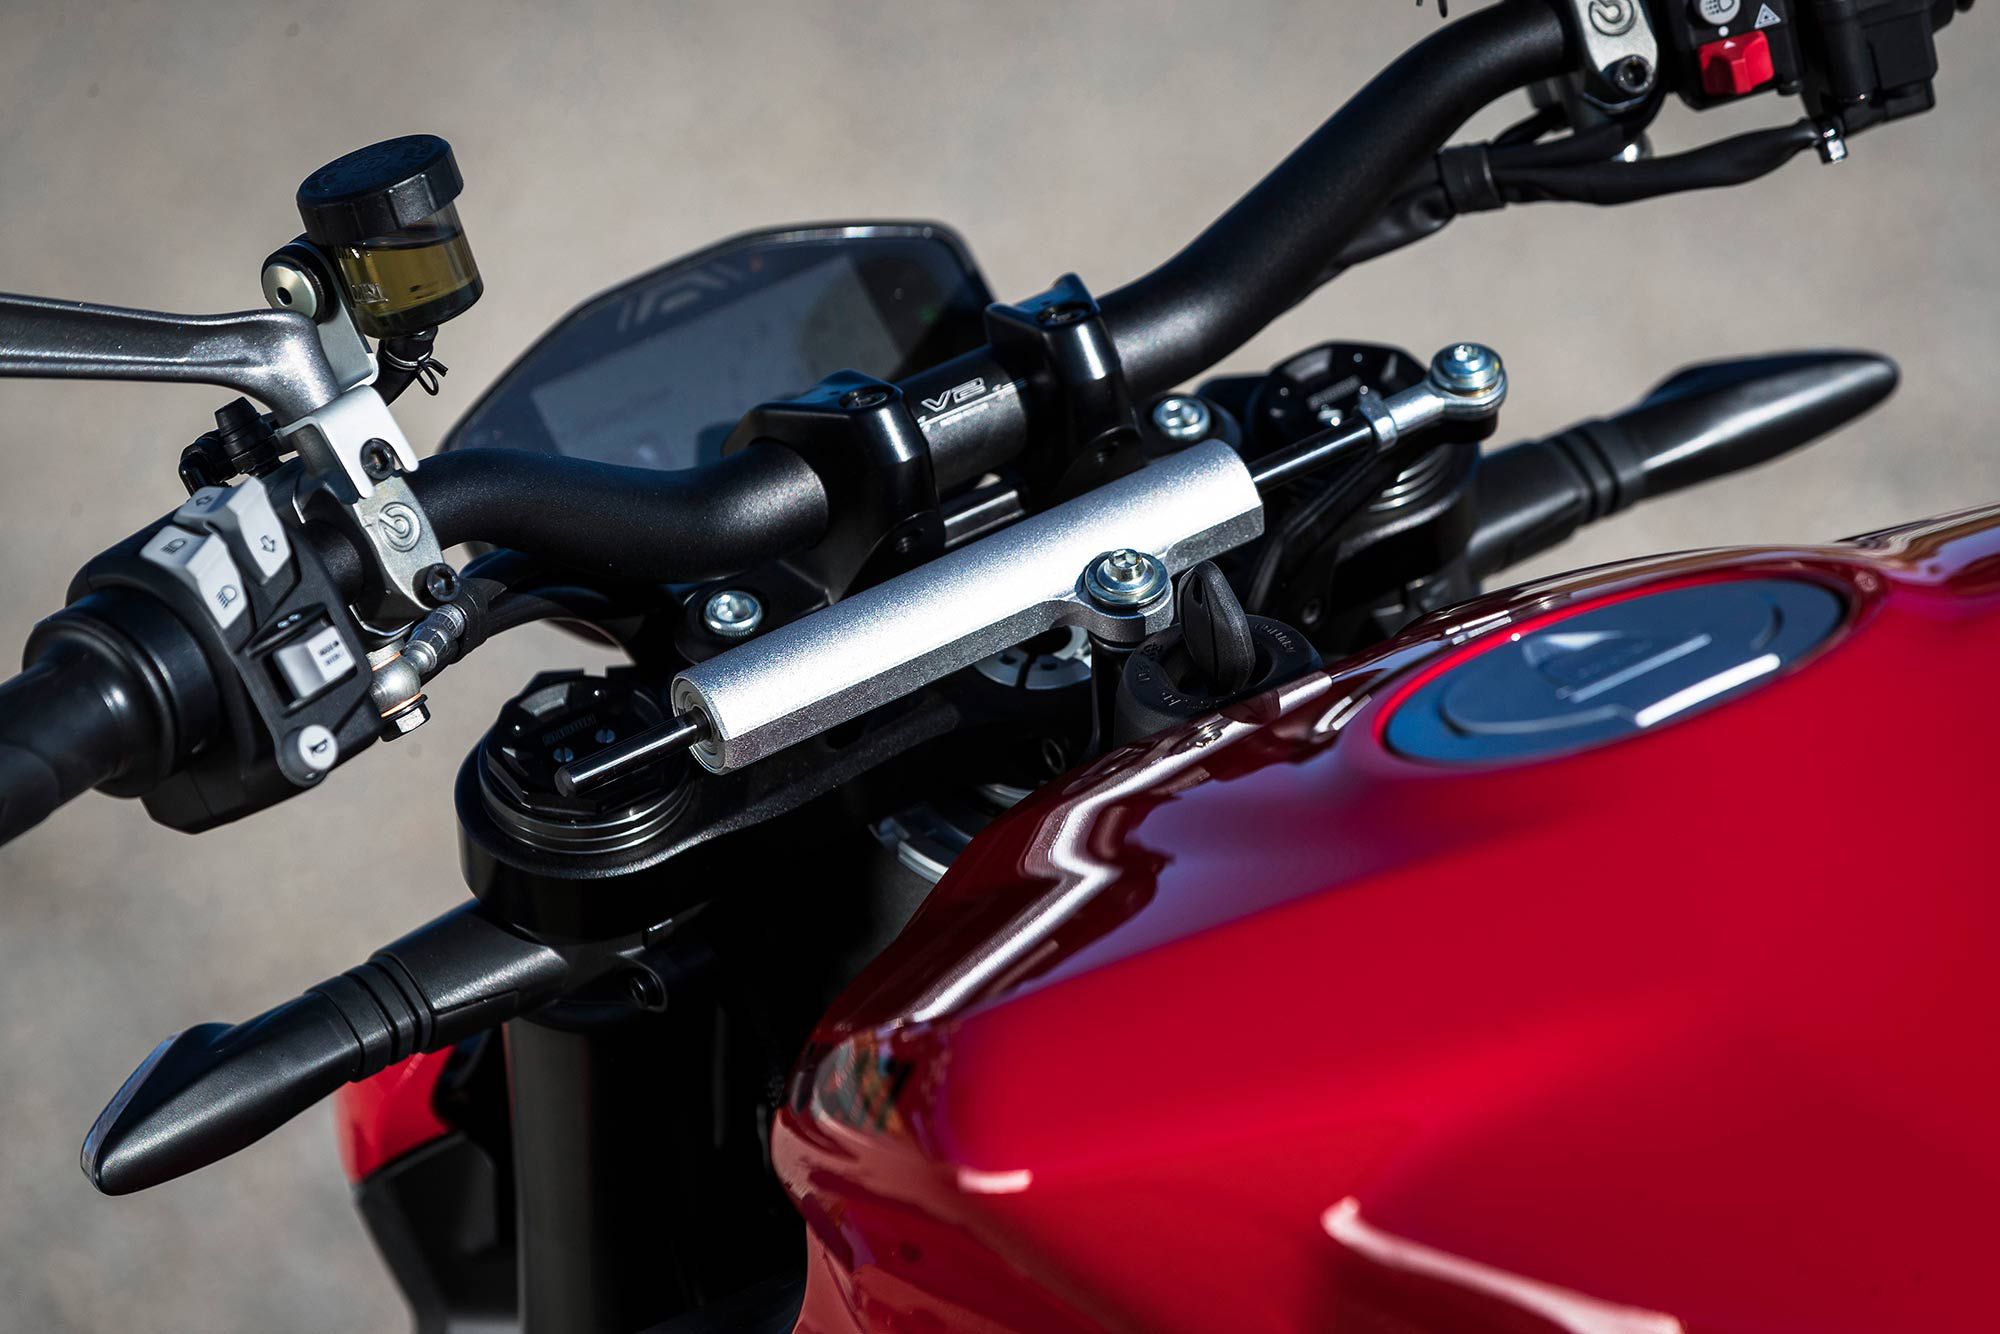 The Streetfighter V2’s one-piece handlebar is pushed forward enough to create an uncomfortable wrist pressure while logging big miles or extended track sessions.